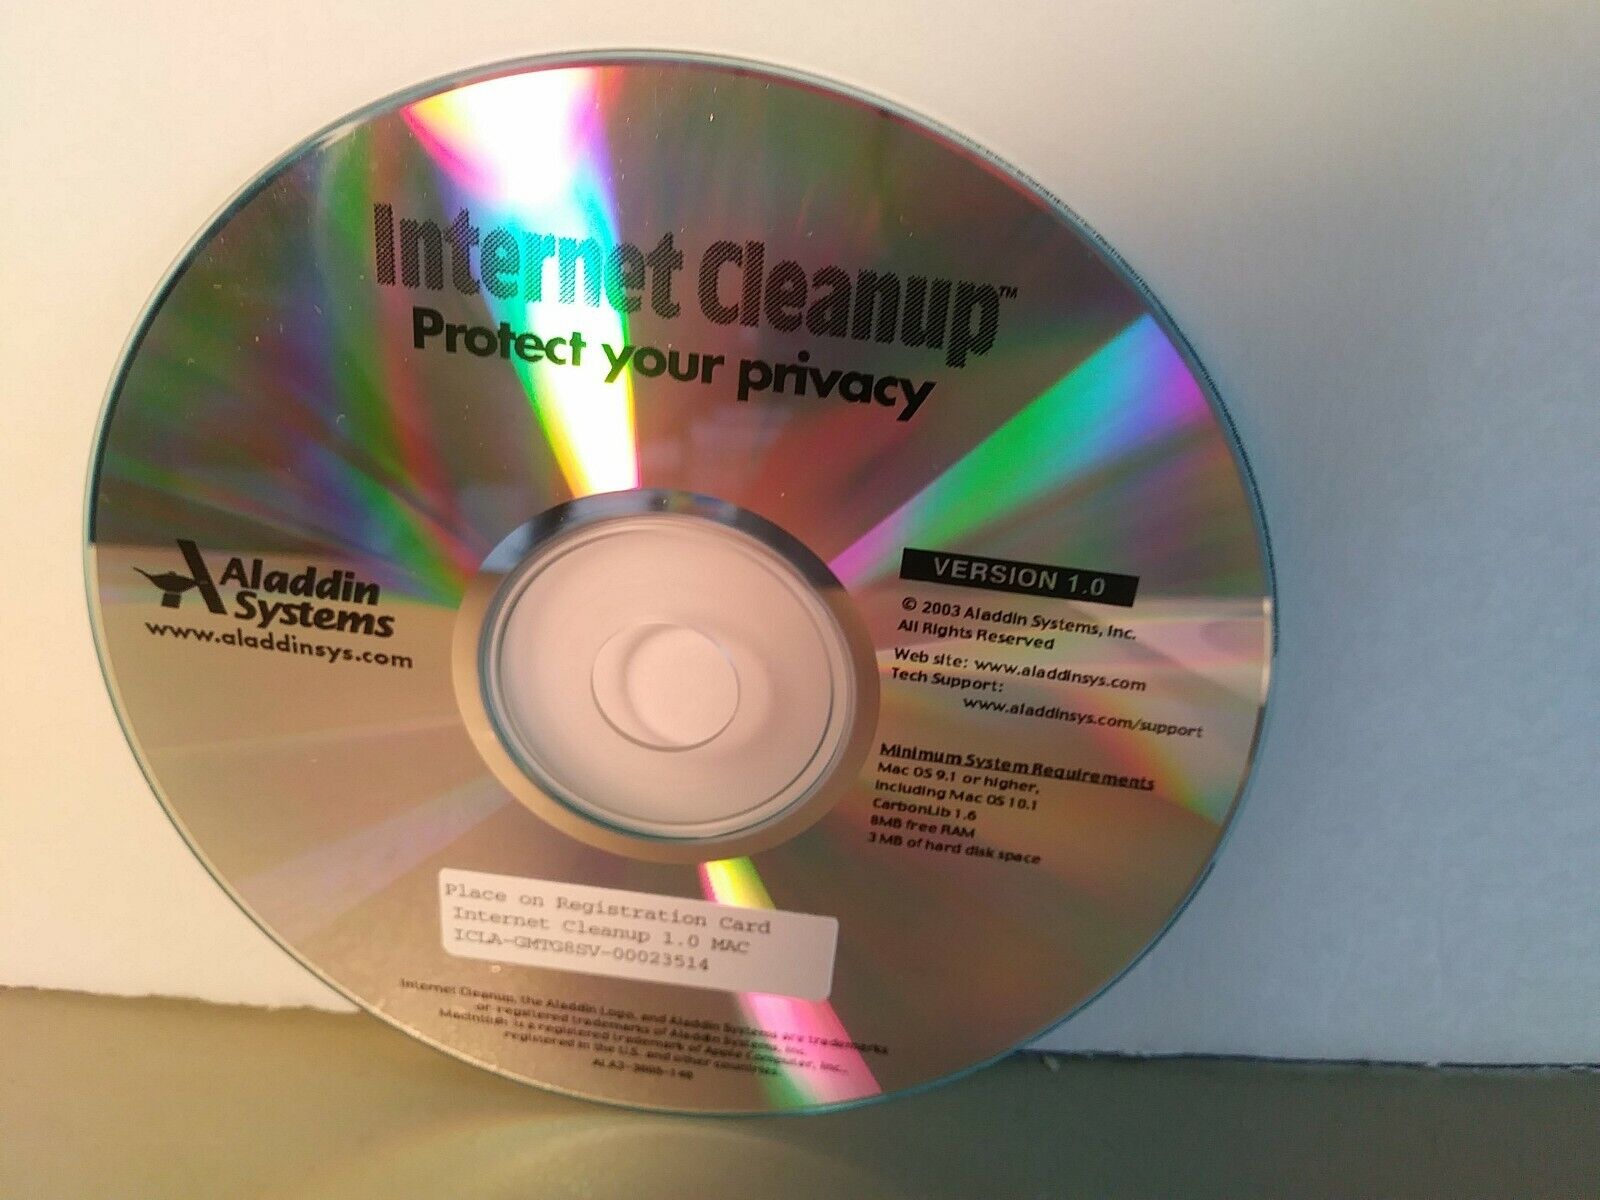 ITHistory (2000) IBM PC Software: INTERNET CLEANUP 1.0 (Aladdin) CD